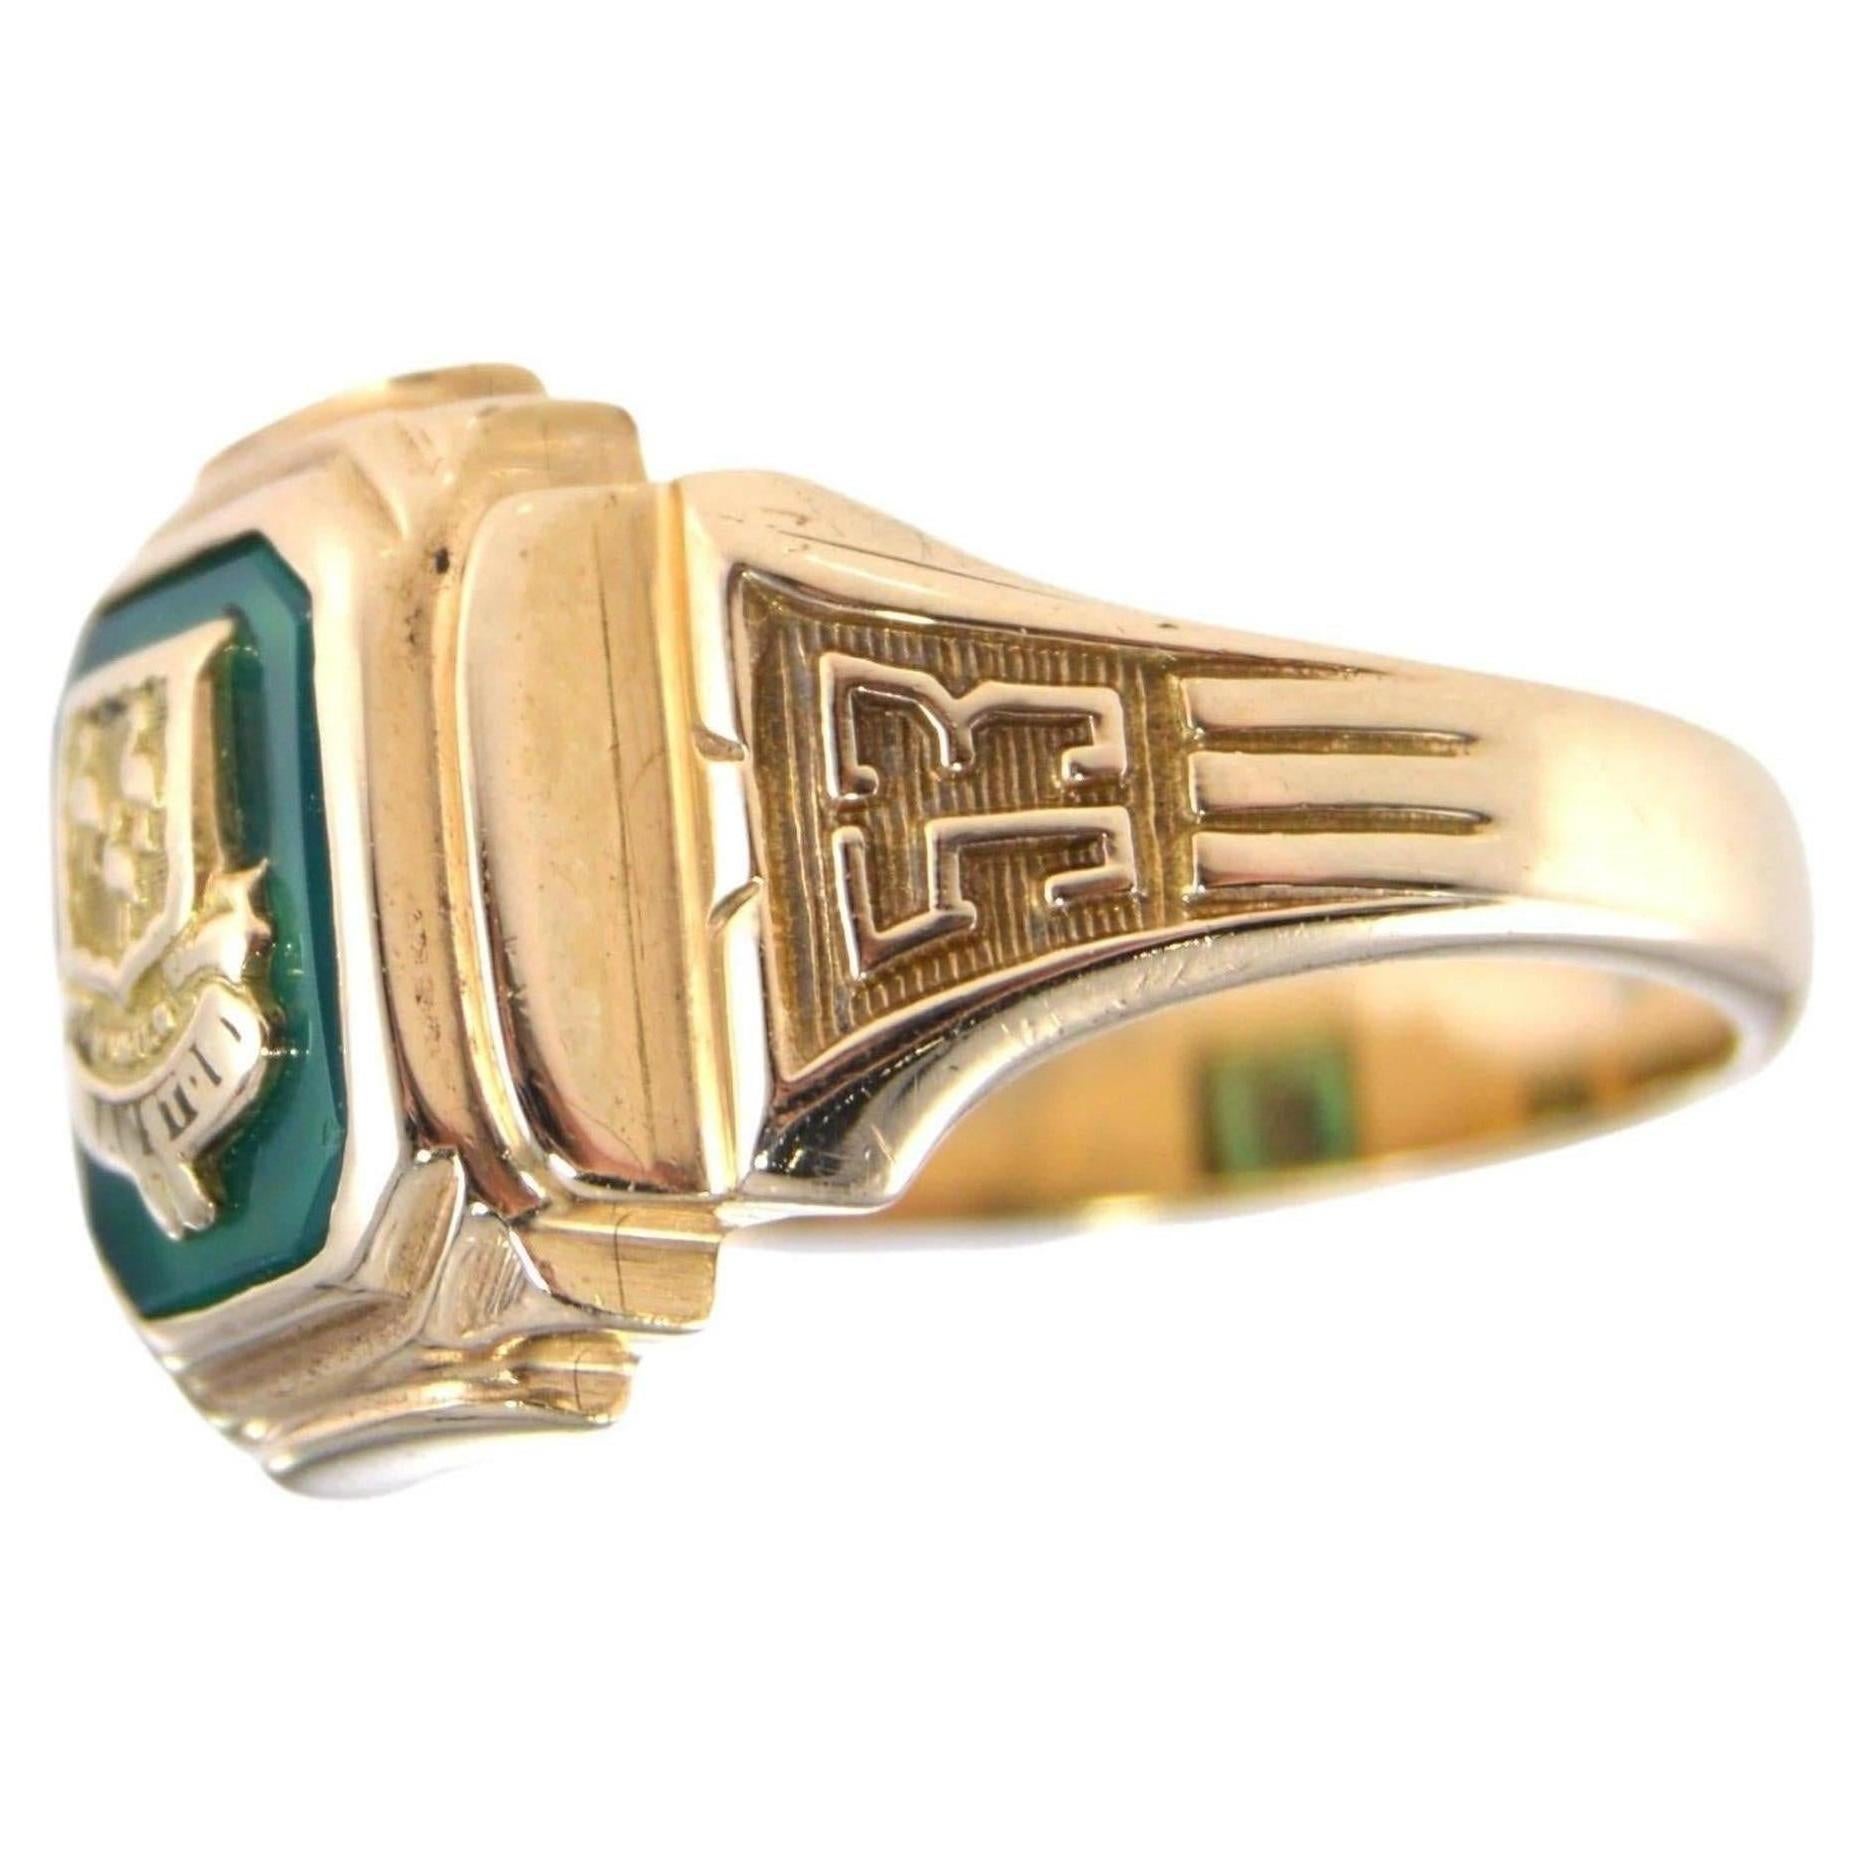 UNISEX RING
STYLE / REFERENCE: Art Deco Signet Ring 
METAL / MATERIAL: 10Kt. Solid Yellow Gold 
CIRCA / YEAR: 1953
SIZE: 6

This great looking Academy ring die struck and is done in Solid 10Kt. Richly embossed it is very unique and can easily be